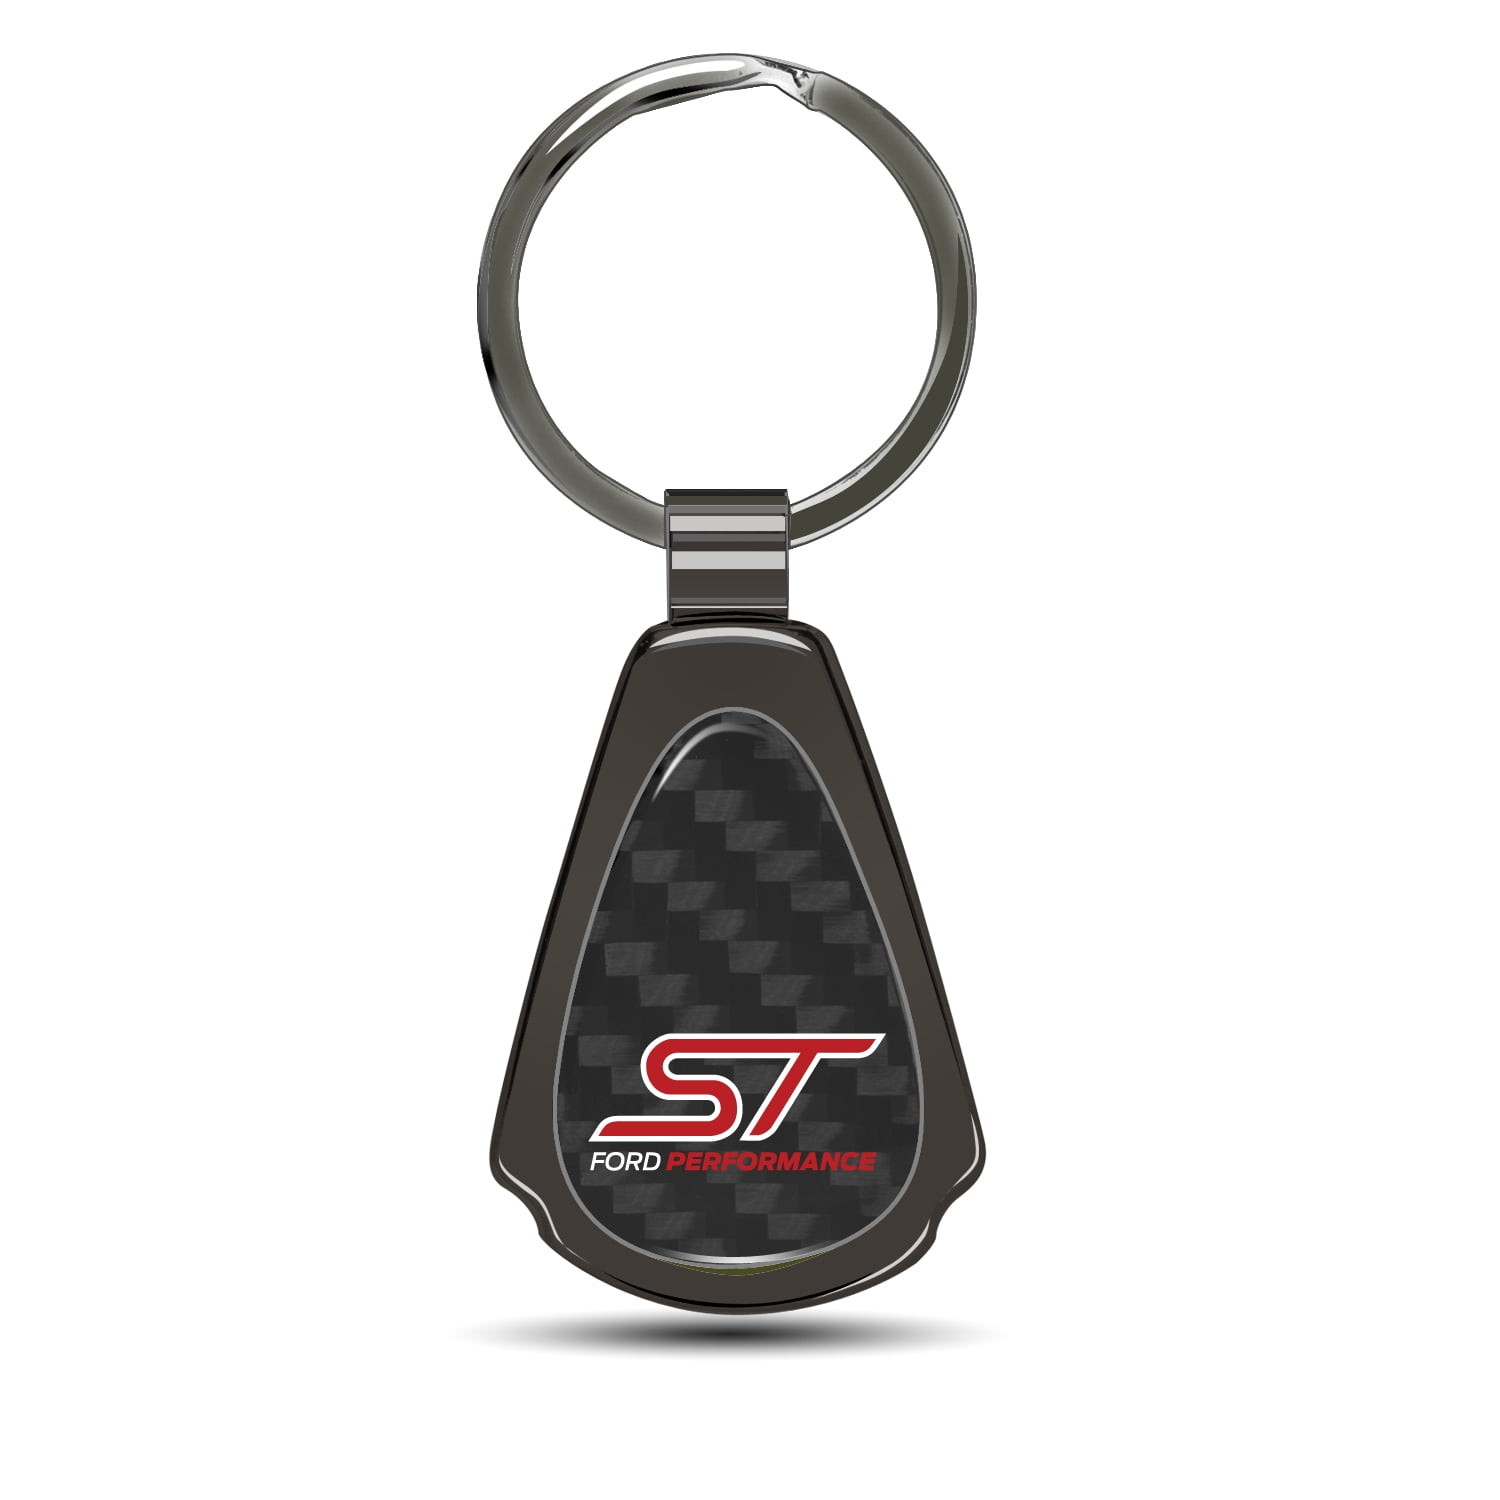 Ford Focus ST Style Key Ring Green Black Focus Fiesta Production Sample No Chain 